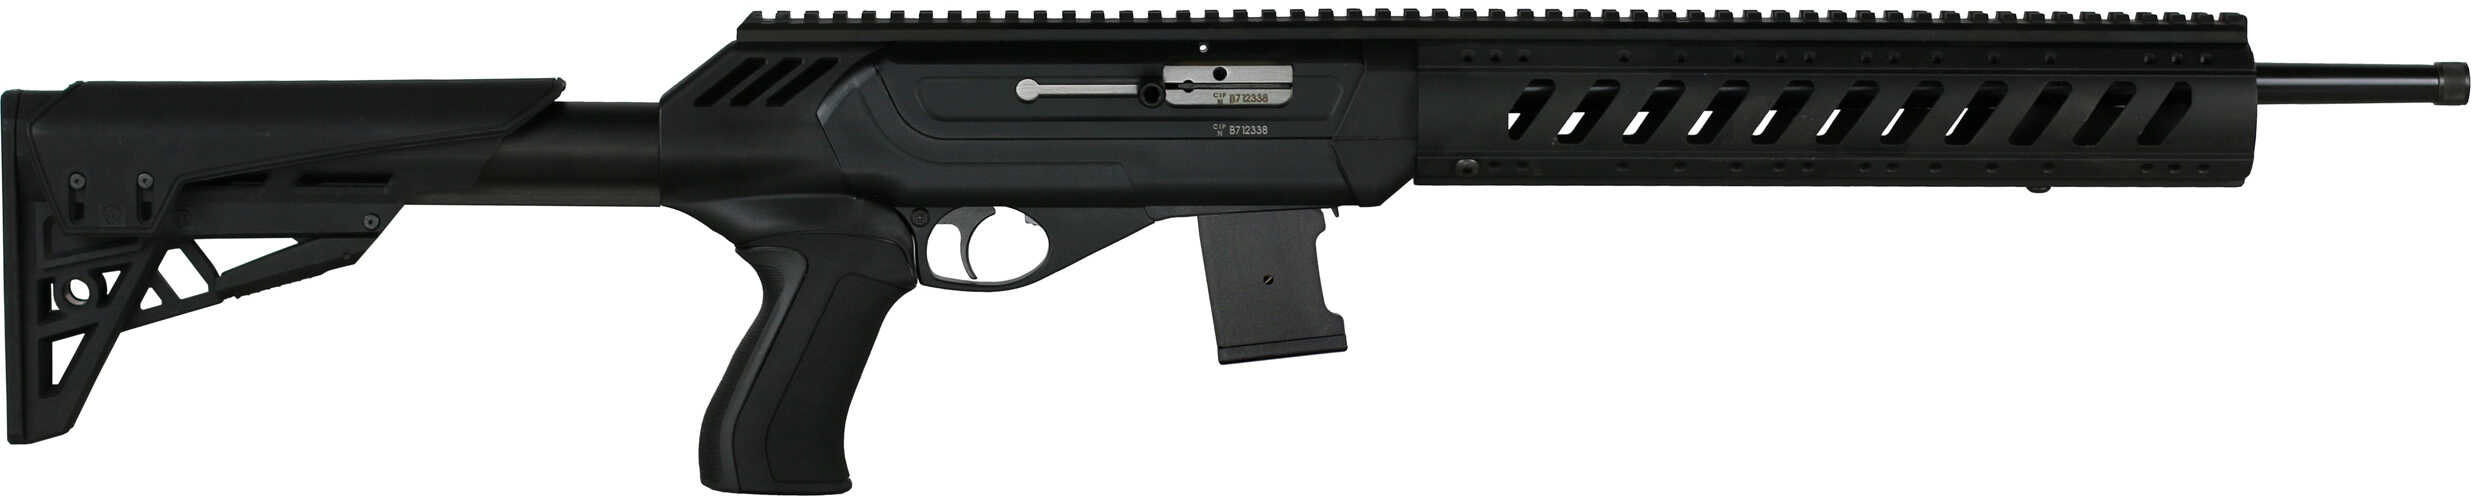 CZ 512 Tactical Rifle Semi-Automatic 22 WMR 16.5" Threaded Barrel 10 Round 6-Position Synthetic Stock Black 02164